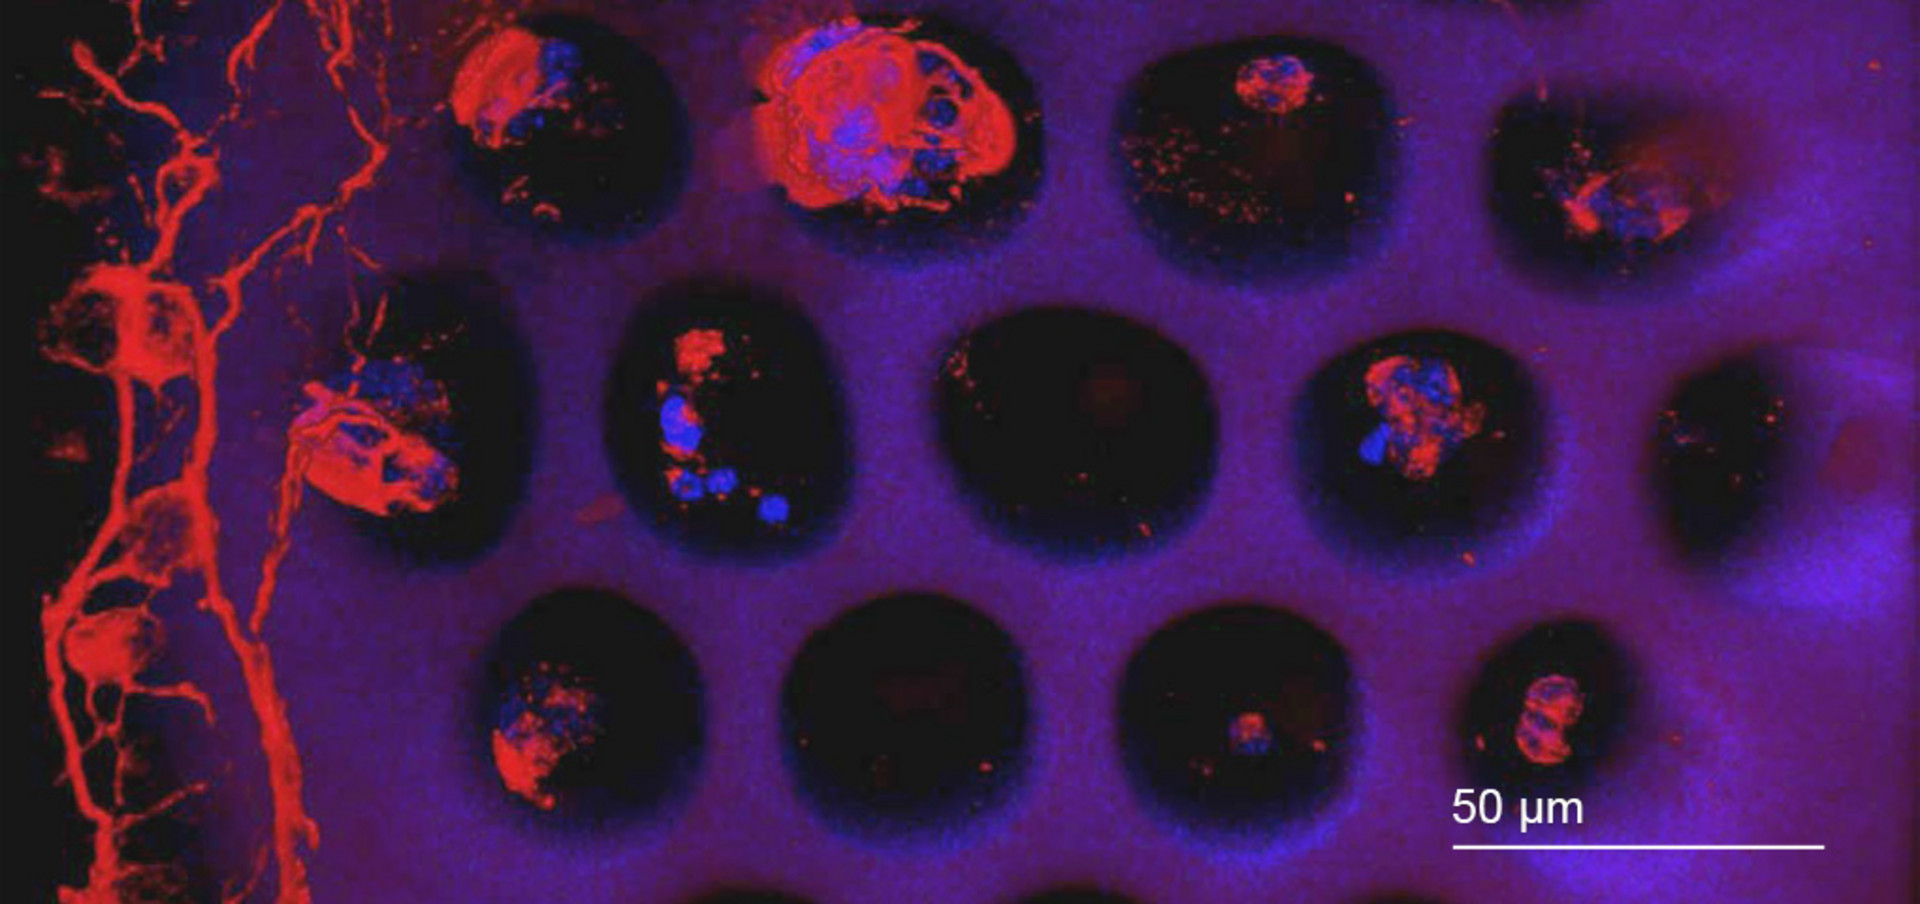 Primary postnatal rat retinal cells created with Nanoscribe's additive manufacturing technology. Image: University of Iowa